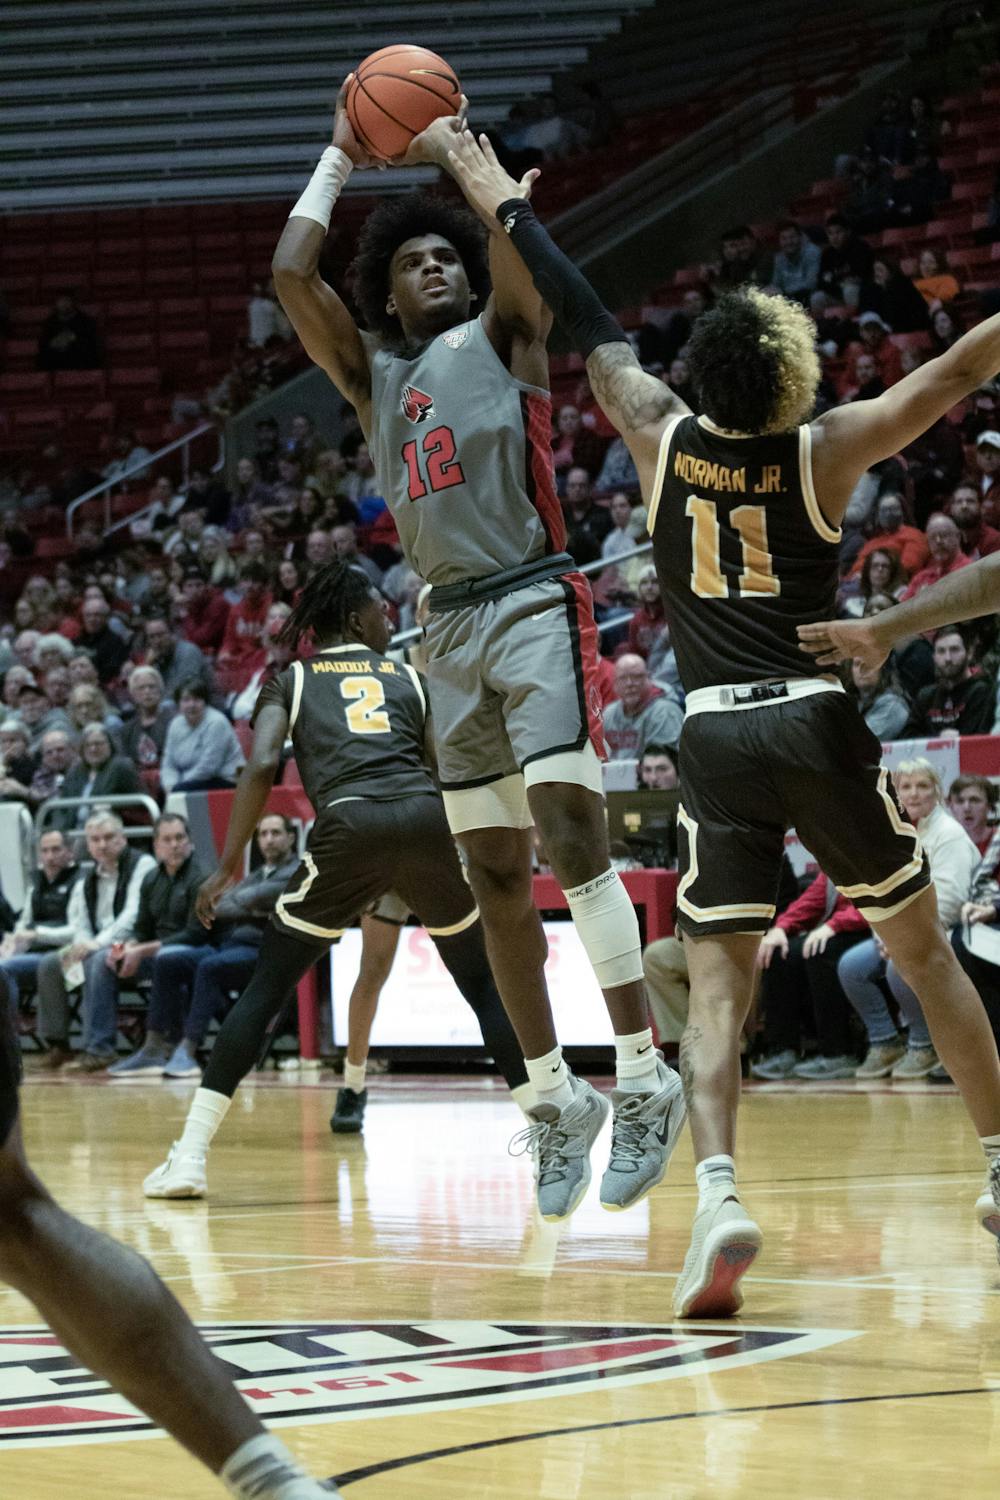 <p>Sophomore forward Jaylin Sellers pulls up from the free throw line in a game against Western Michigan on Jan. 17 at Worthen Arena. Sellers was 4 for 7 from field goal range. Brayden Goins, DN</p>